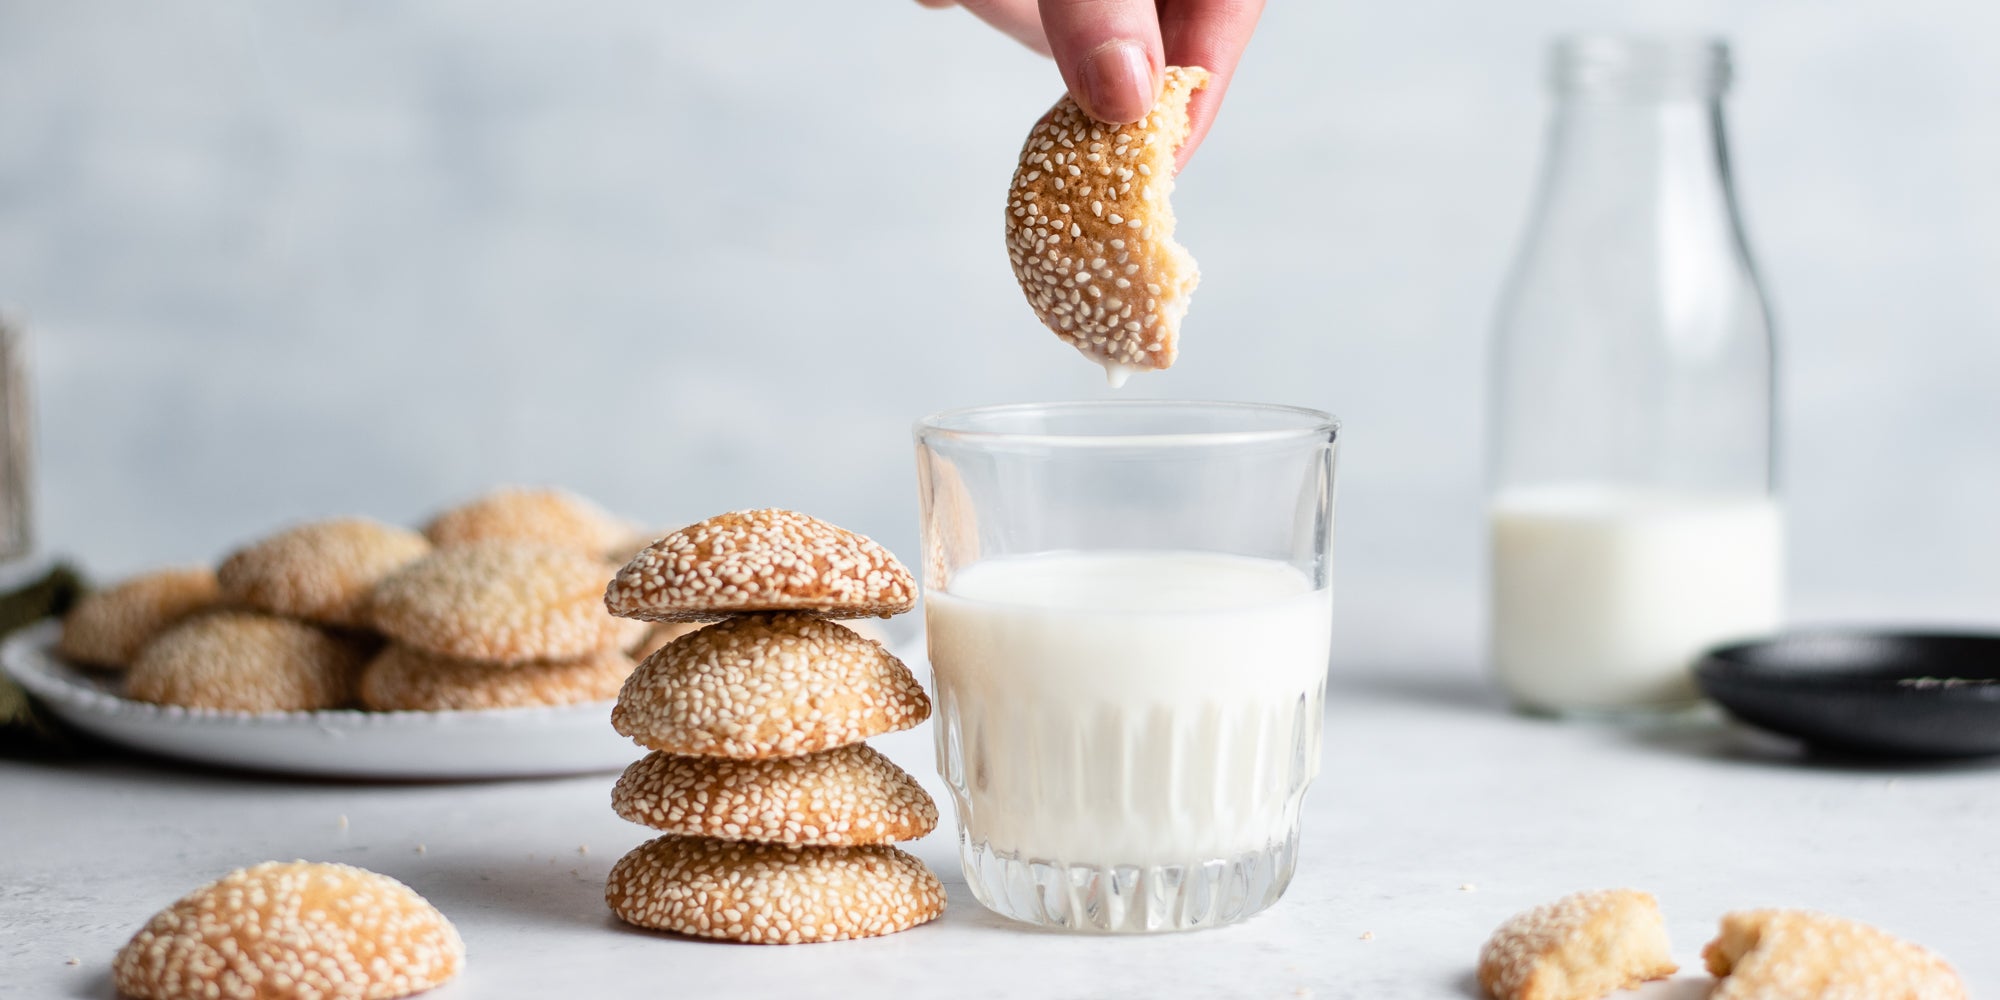 A hand dipping a sesame cookie into a glass of milk